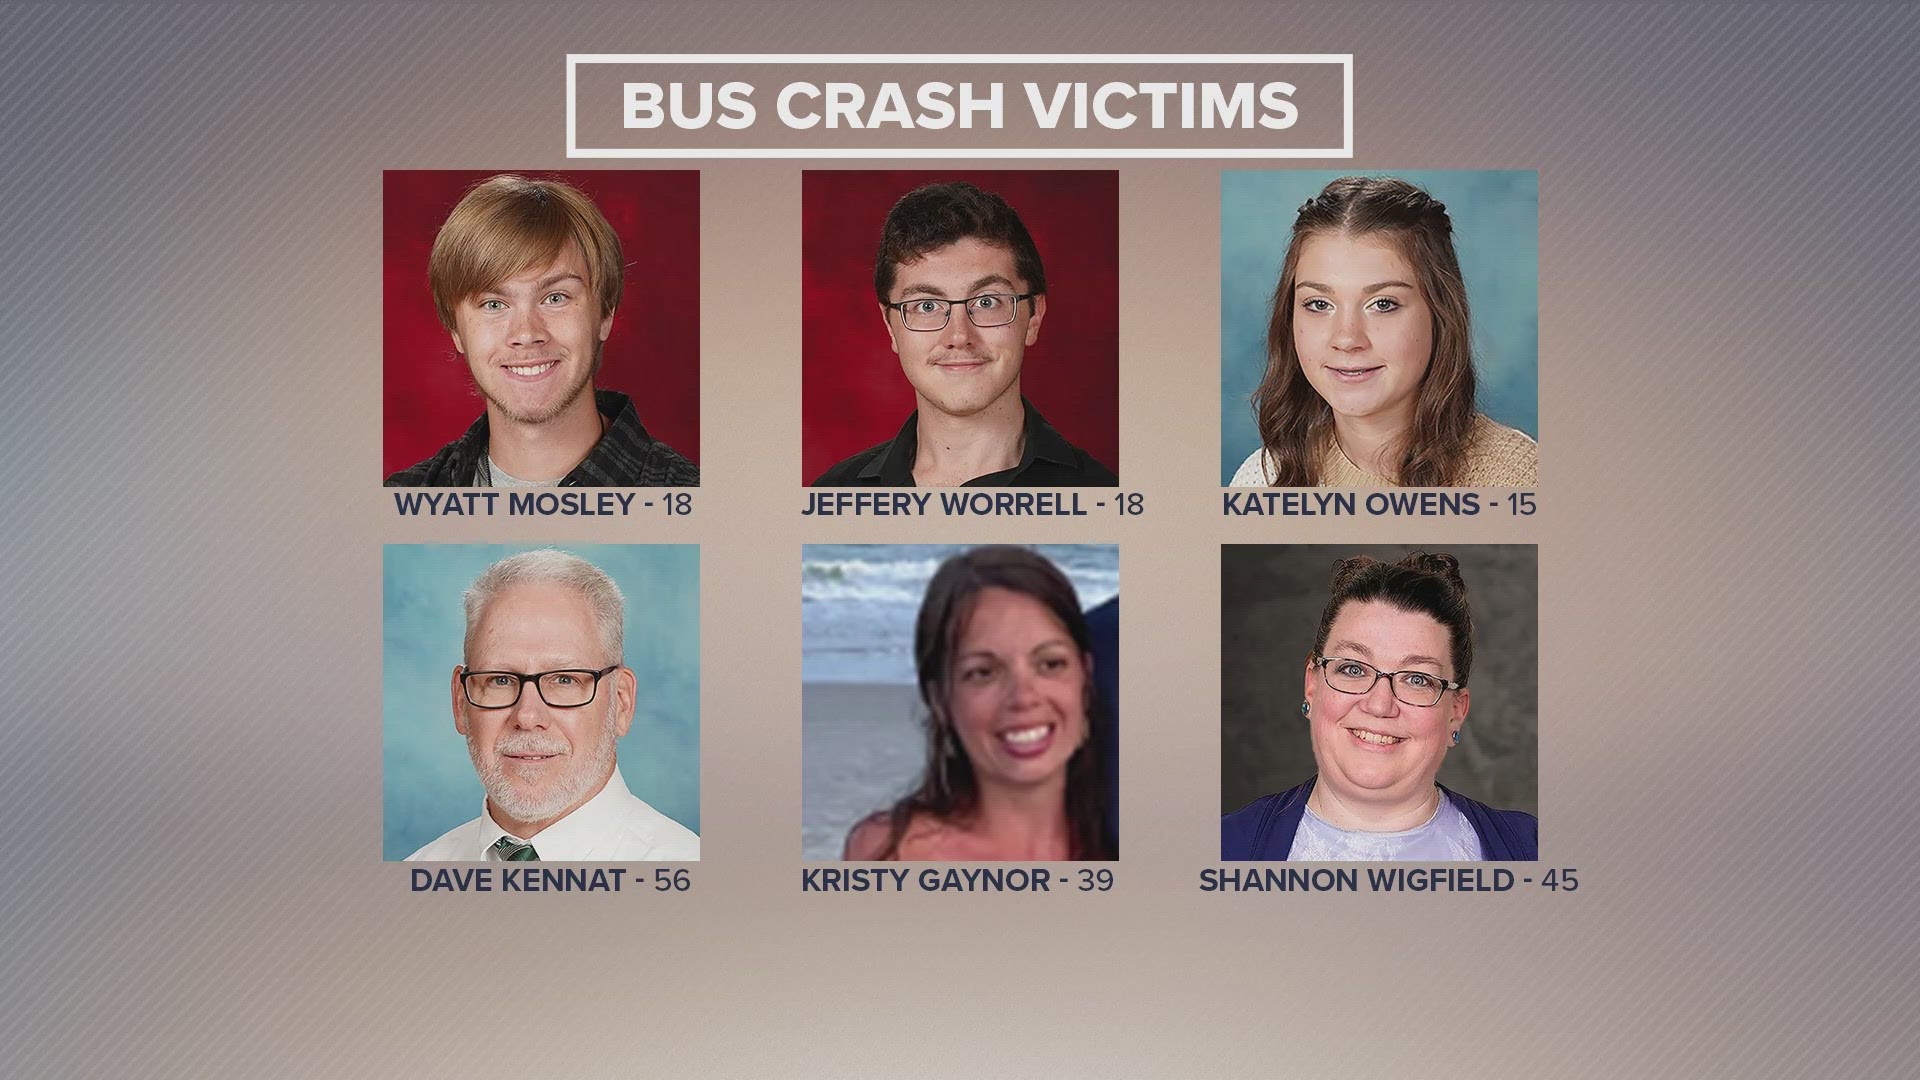 All three teens killed in the crash were on the bus, while the three adults were inside a passenger vehicle that was following the bus.